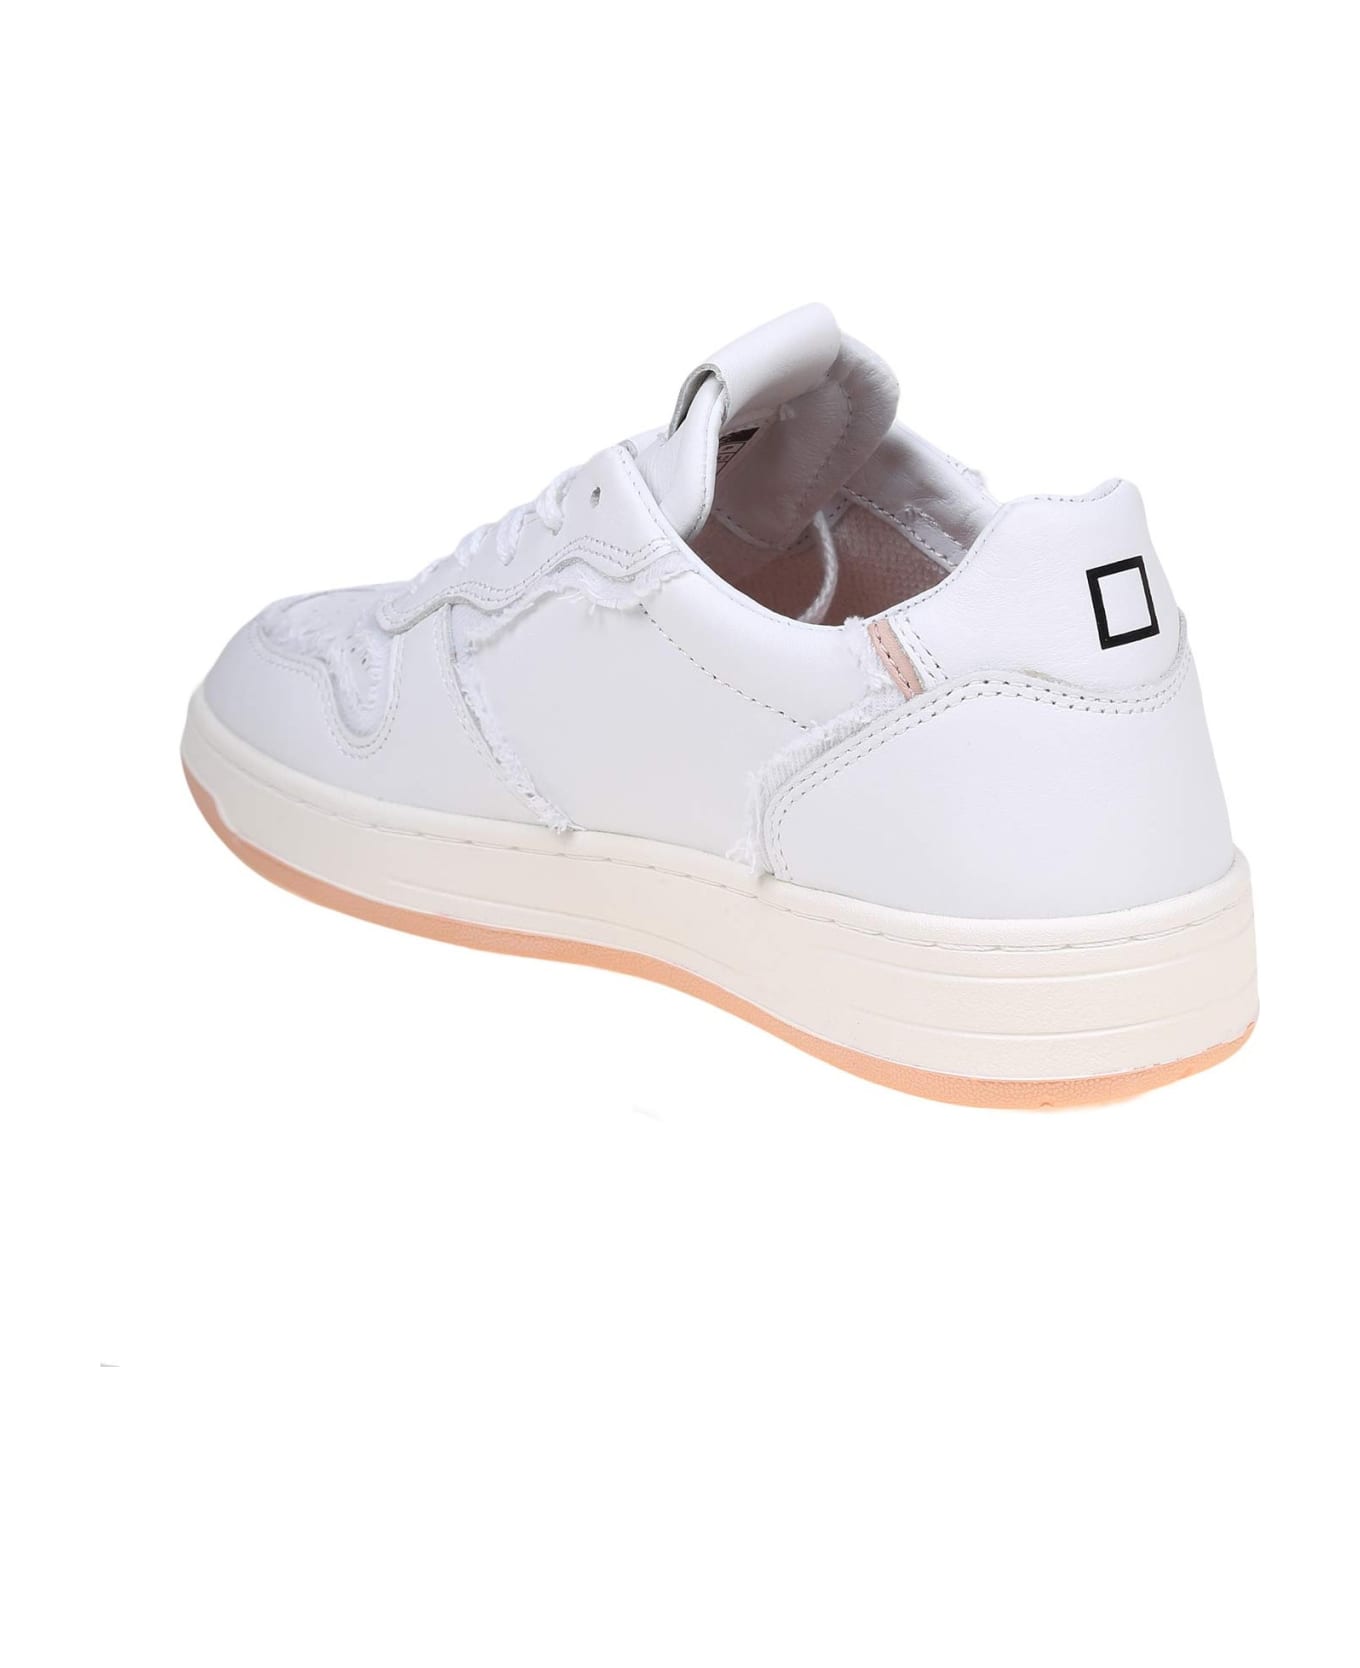 D.A.T.E. Court Sneakers In White Leather - Peach スニーカー